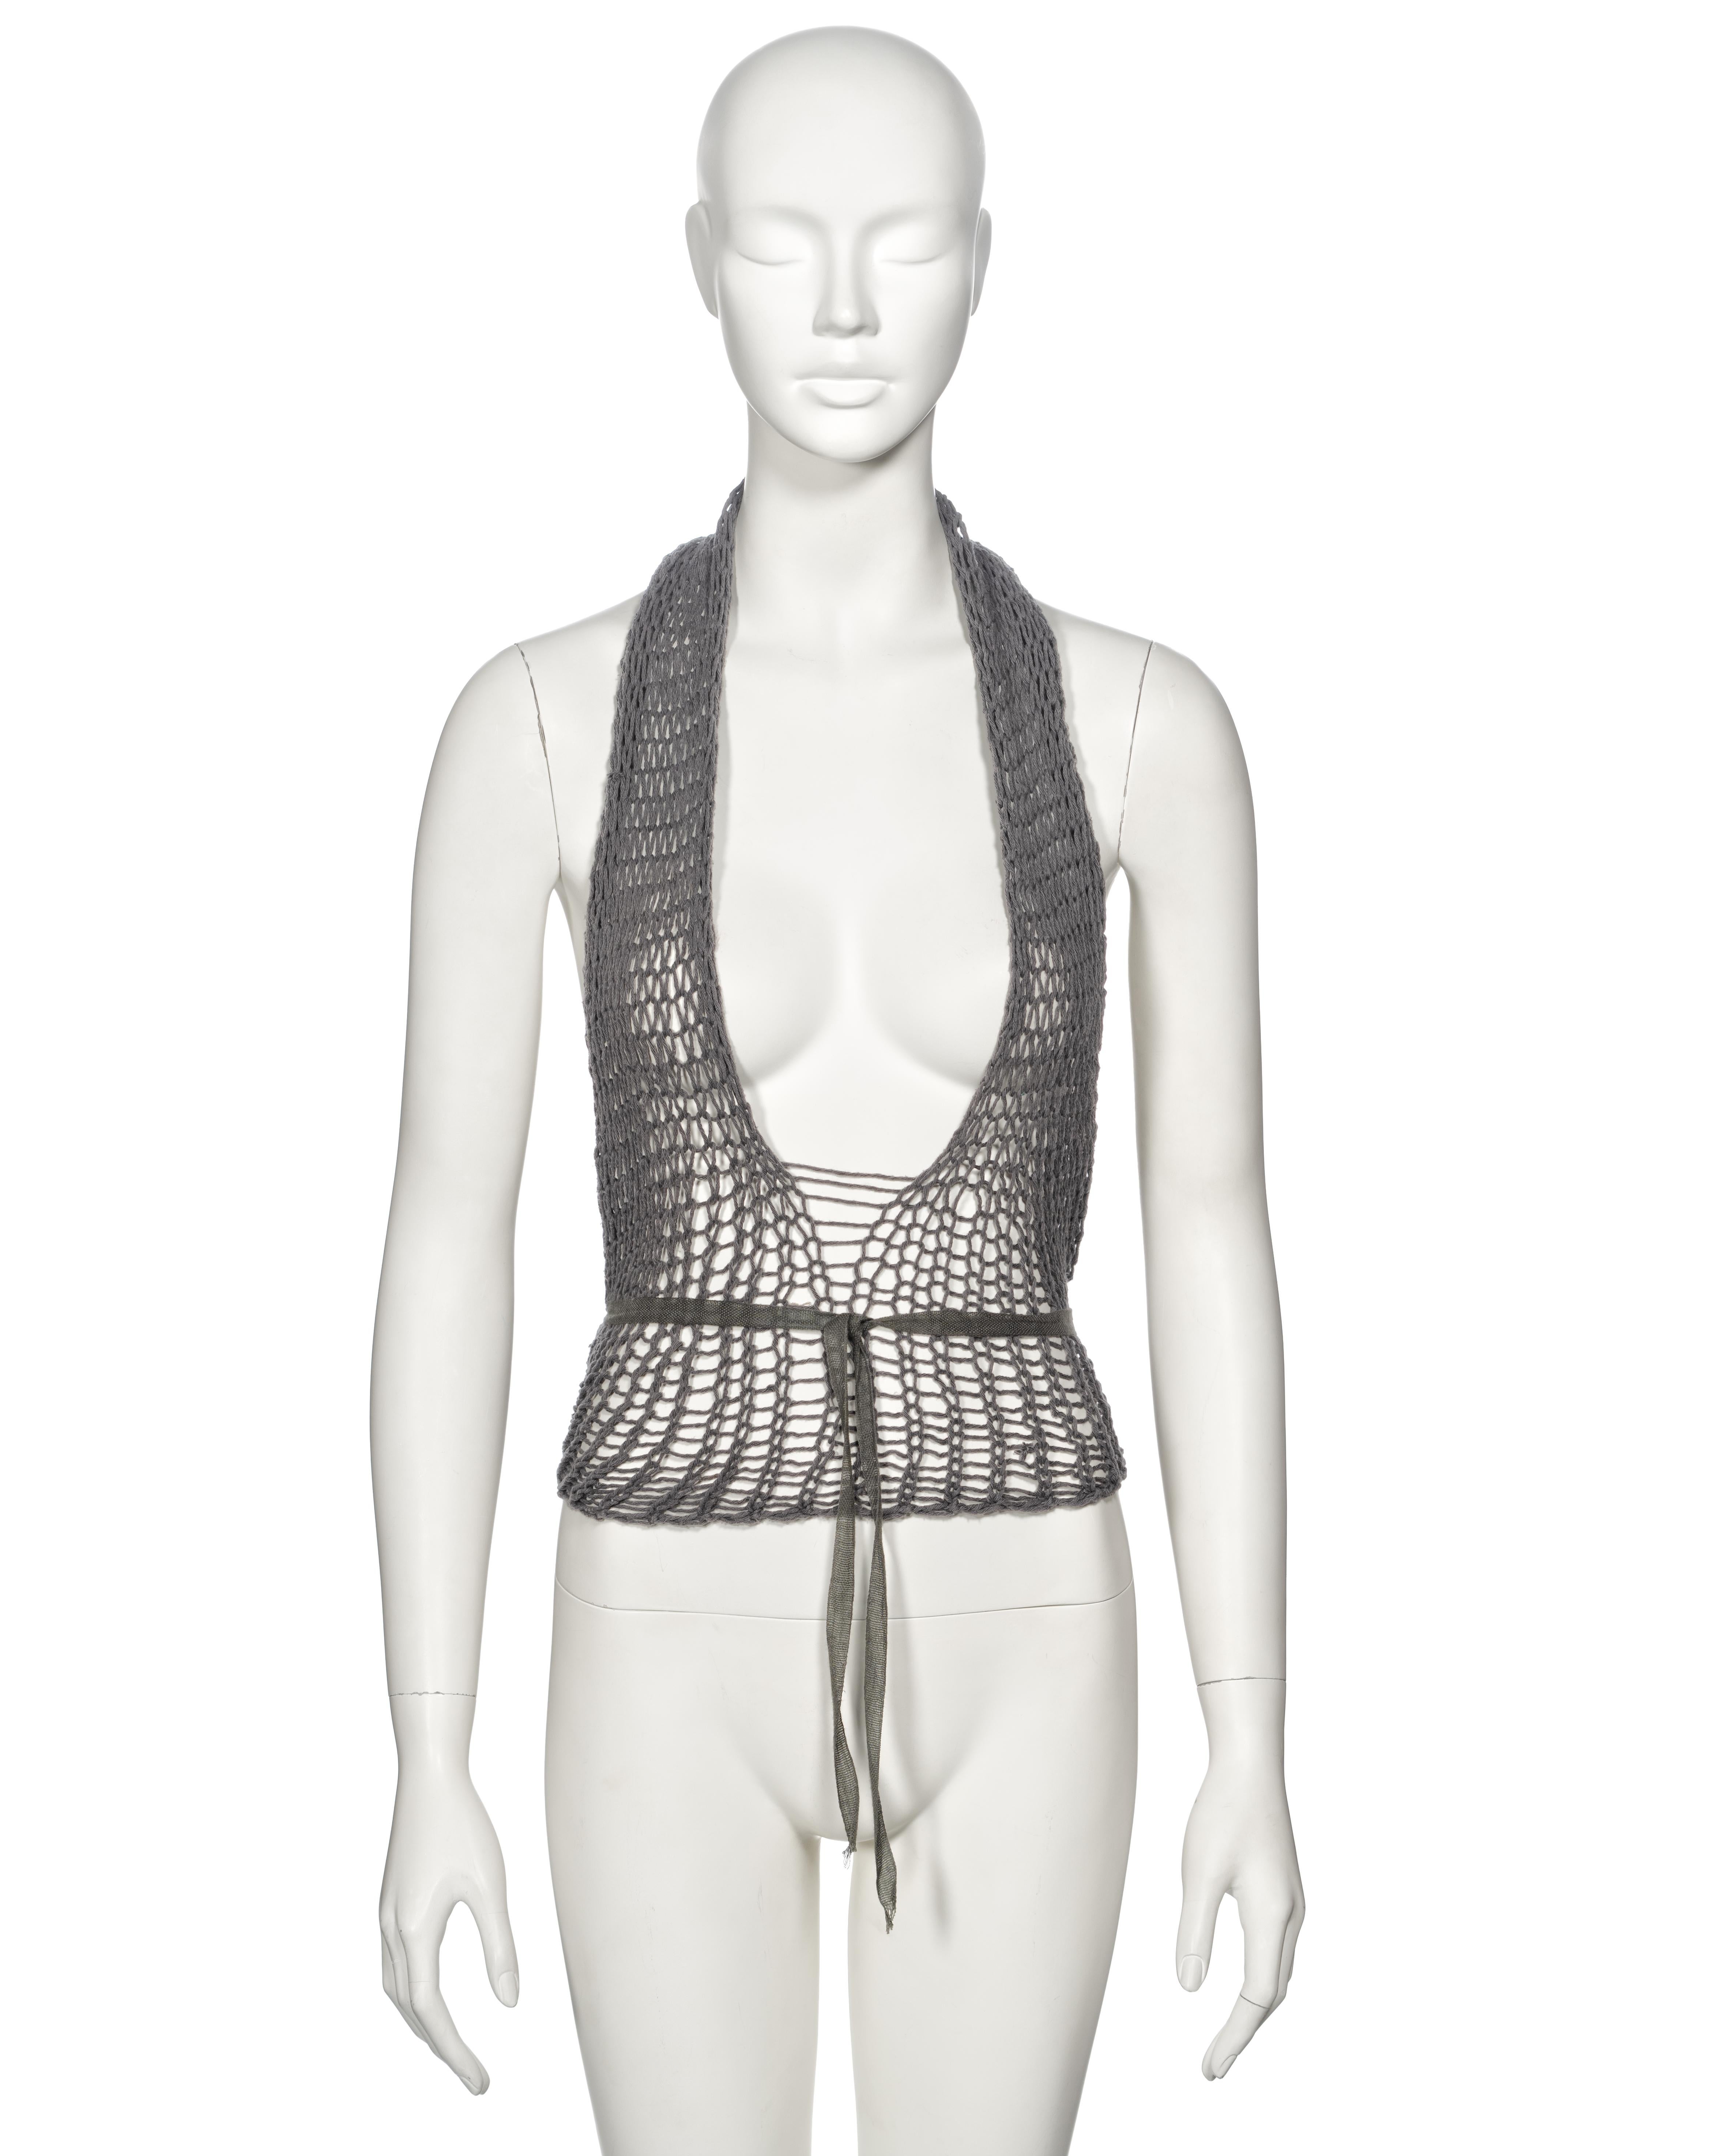 ▪ Archival Margiela Top
▪ Creative Director: Martin Margiela
▪ Spring-Summer 1993
▪ Sold by One of a Kind Archive
▪ Openwork knit in grey cotton yarn 
▪ Halterneck 
▪ Plunging neckline 
▪ Wrap fastening with cotton ribbon ties 
▪ One Size
▪ Made for